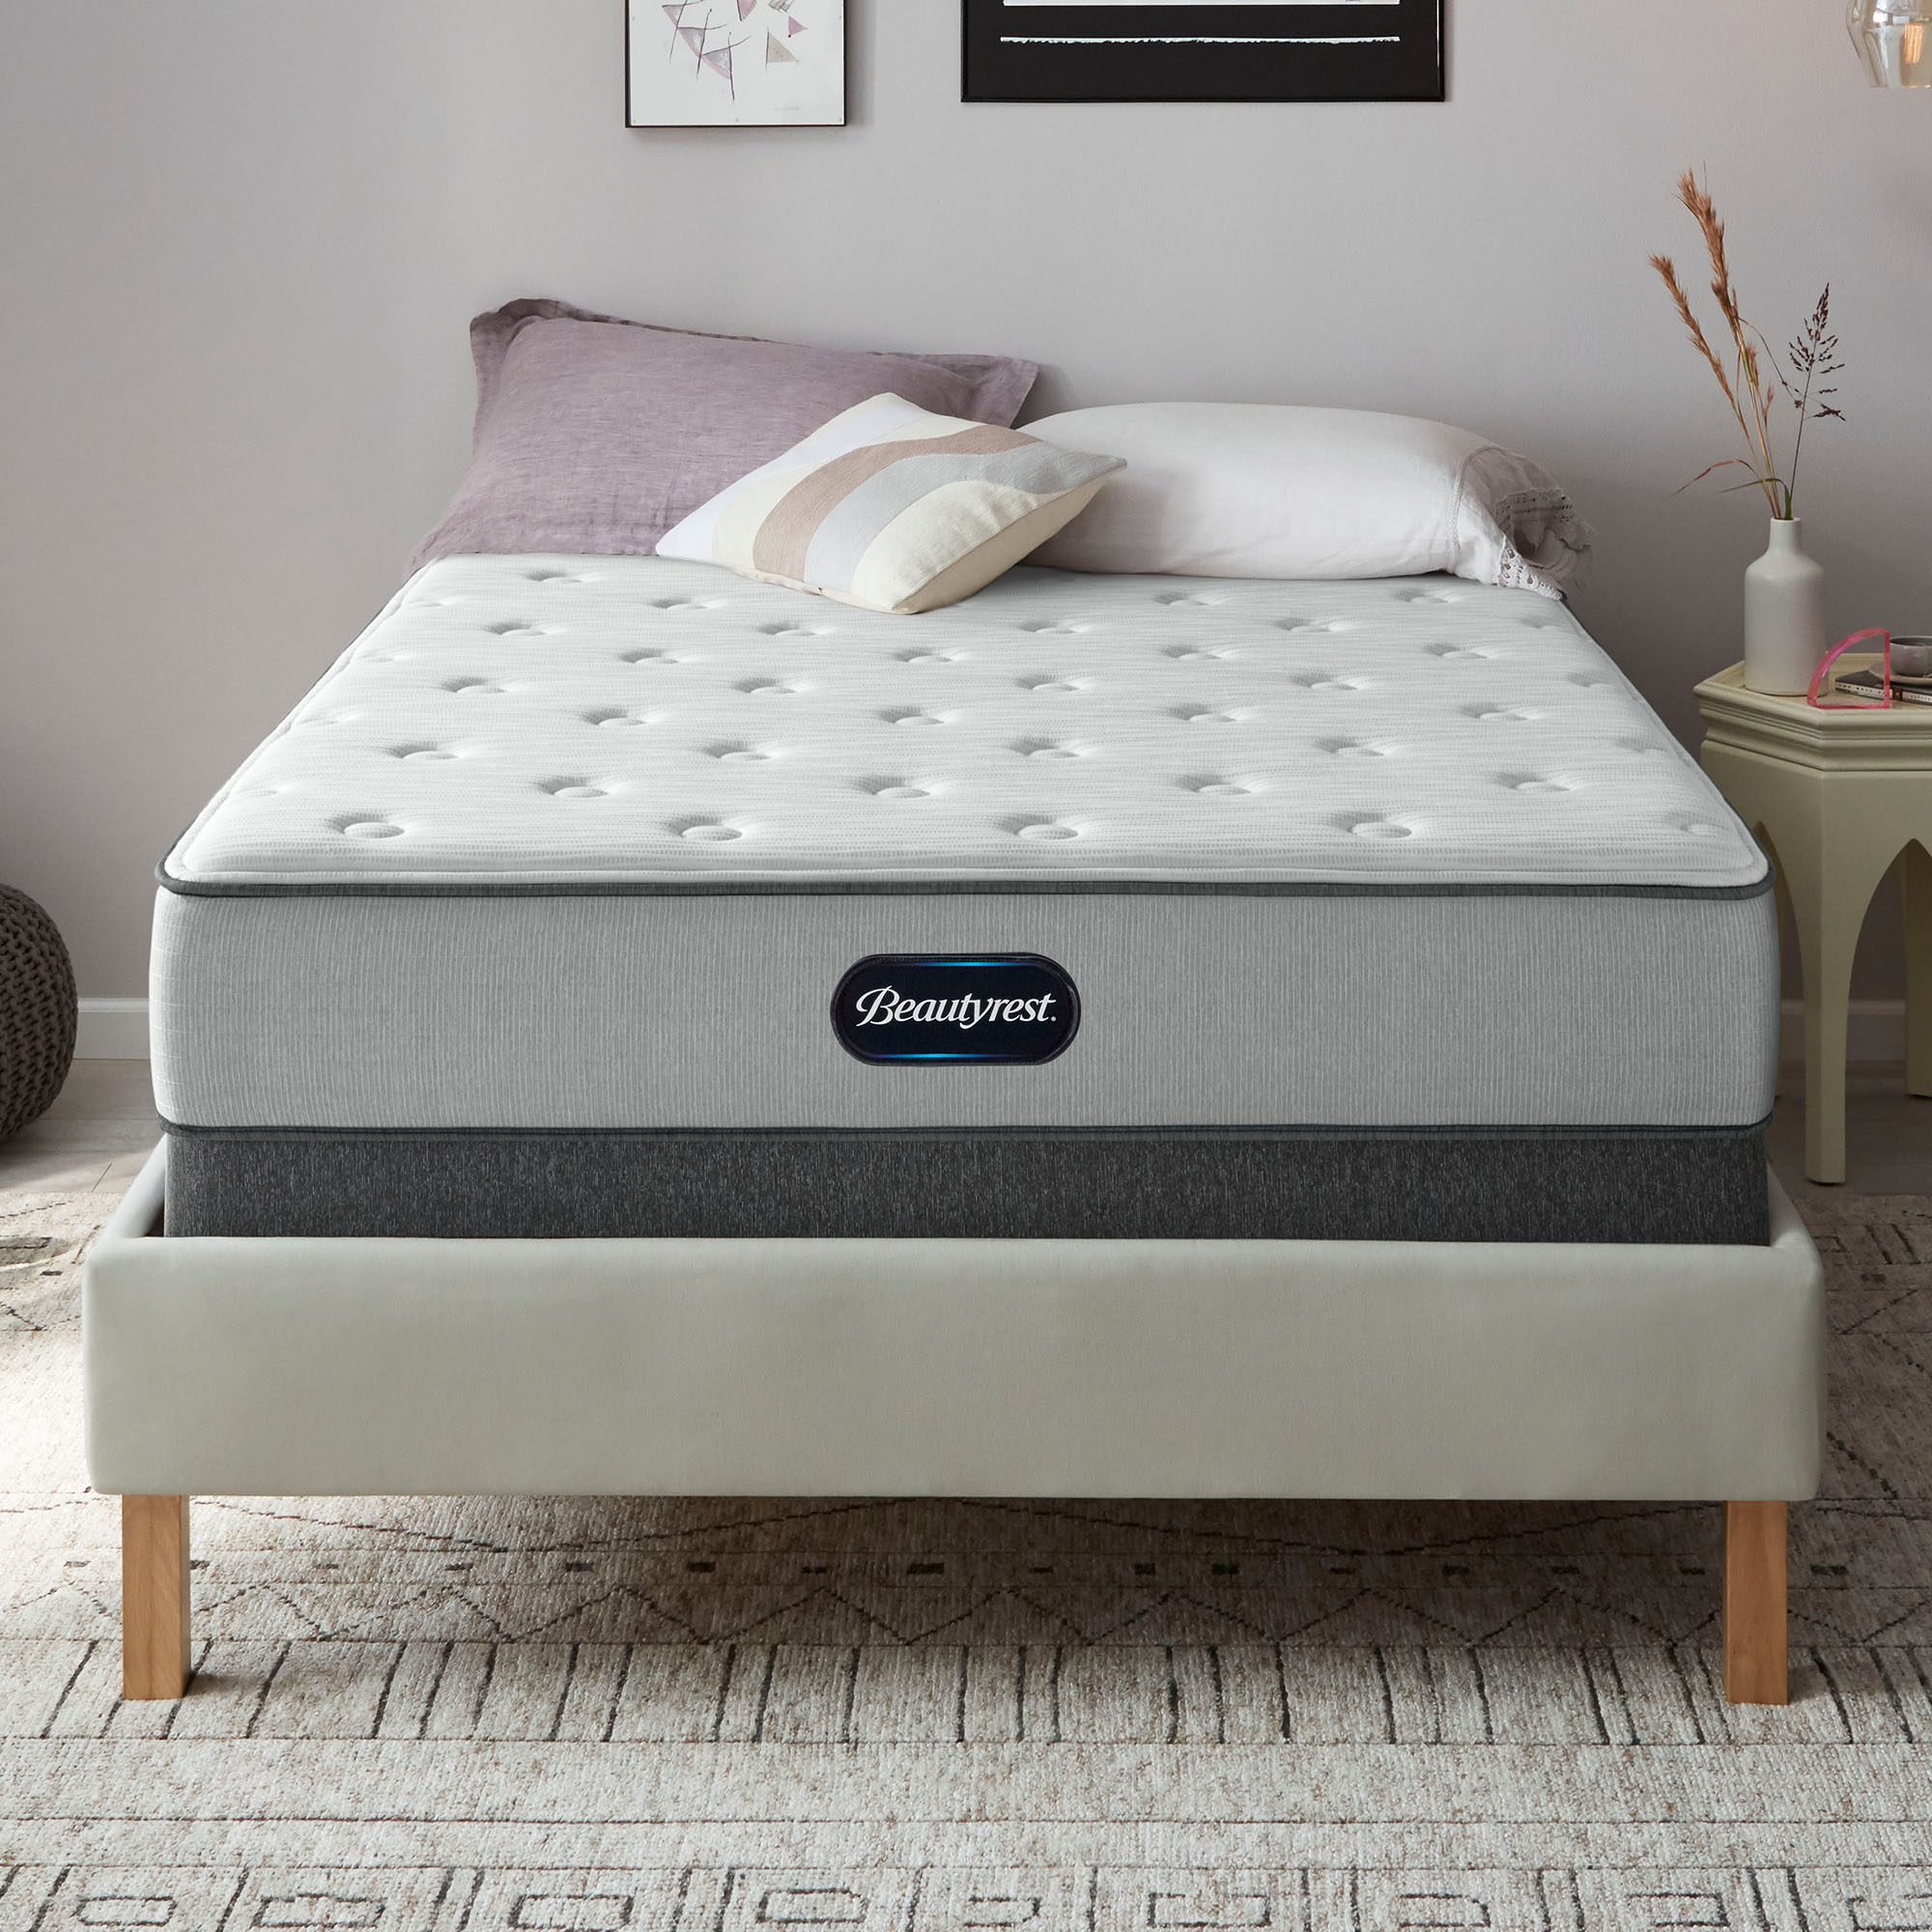 Where Are Beautyrest Mattresses Crafted?